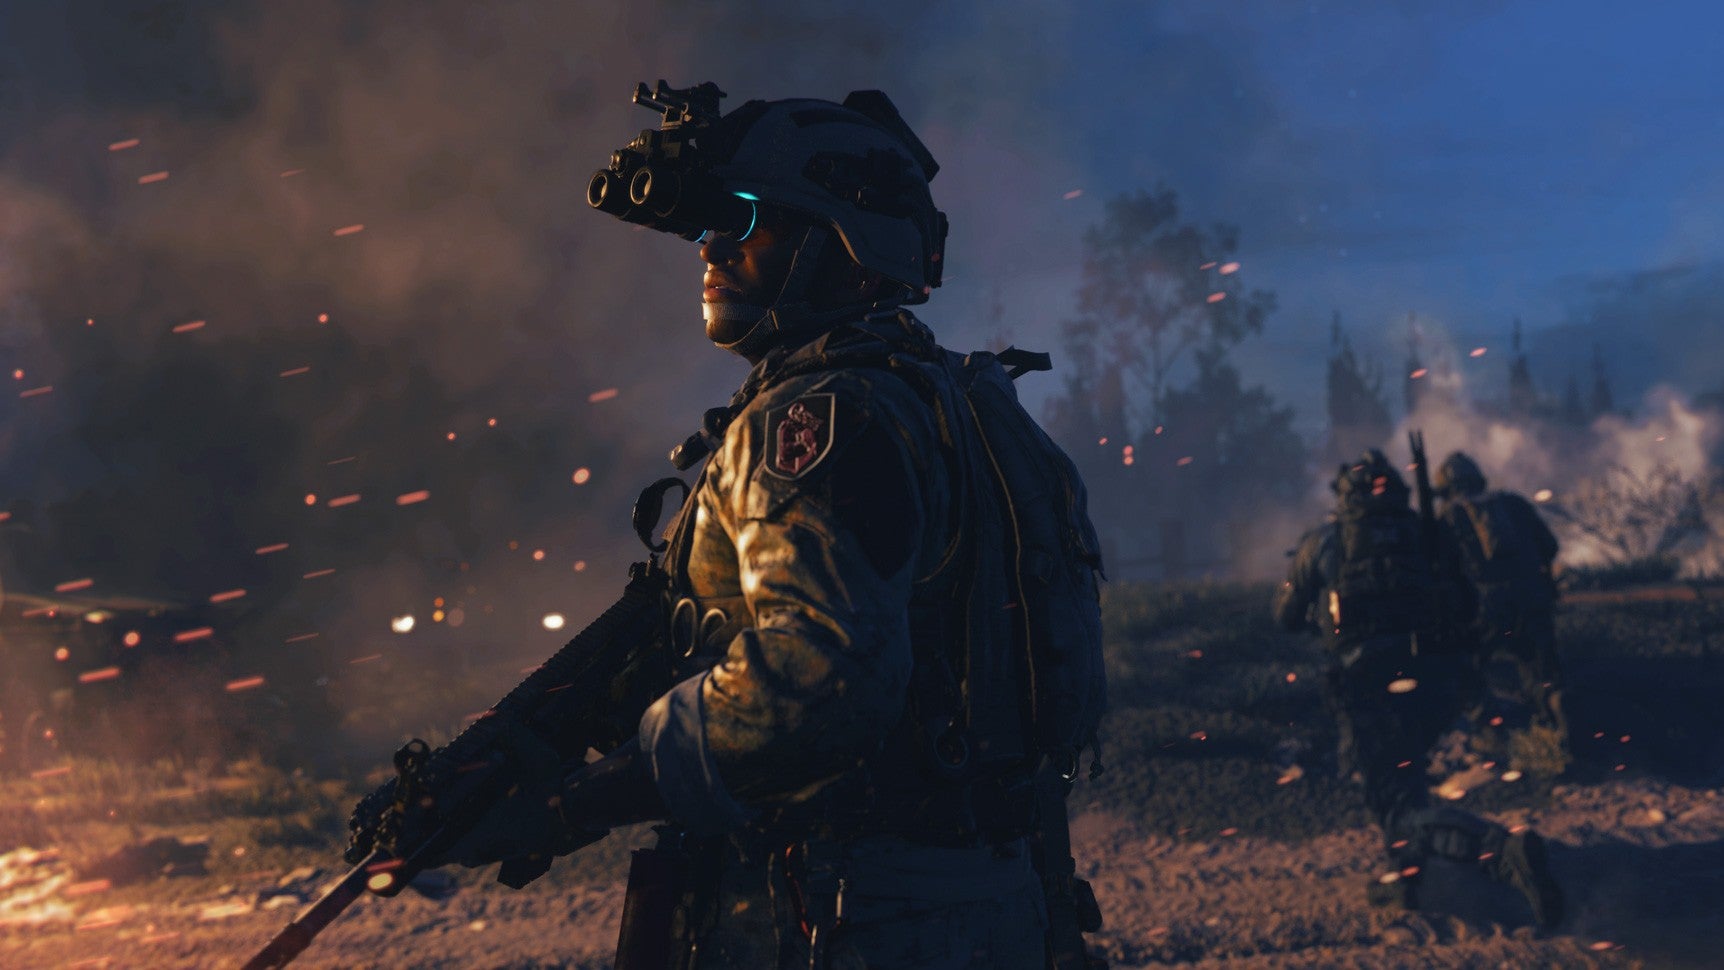 Image for Sony says Microsoft’s ownership of Call of Duty could influence console buyers in the future